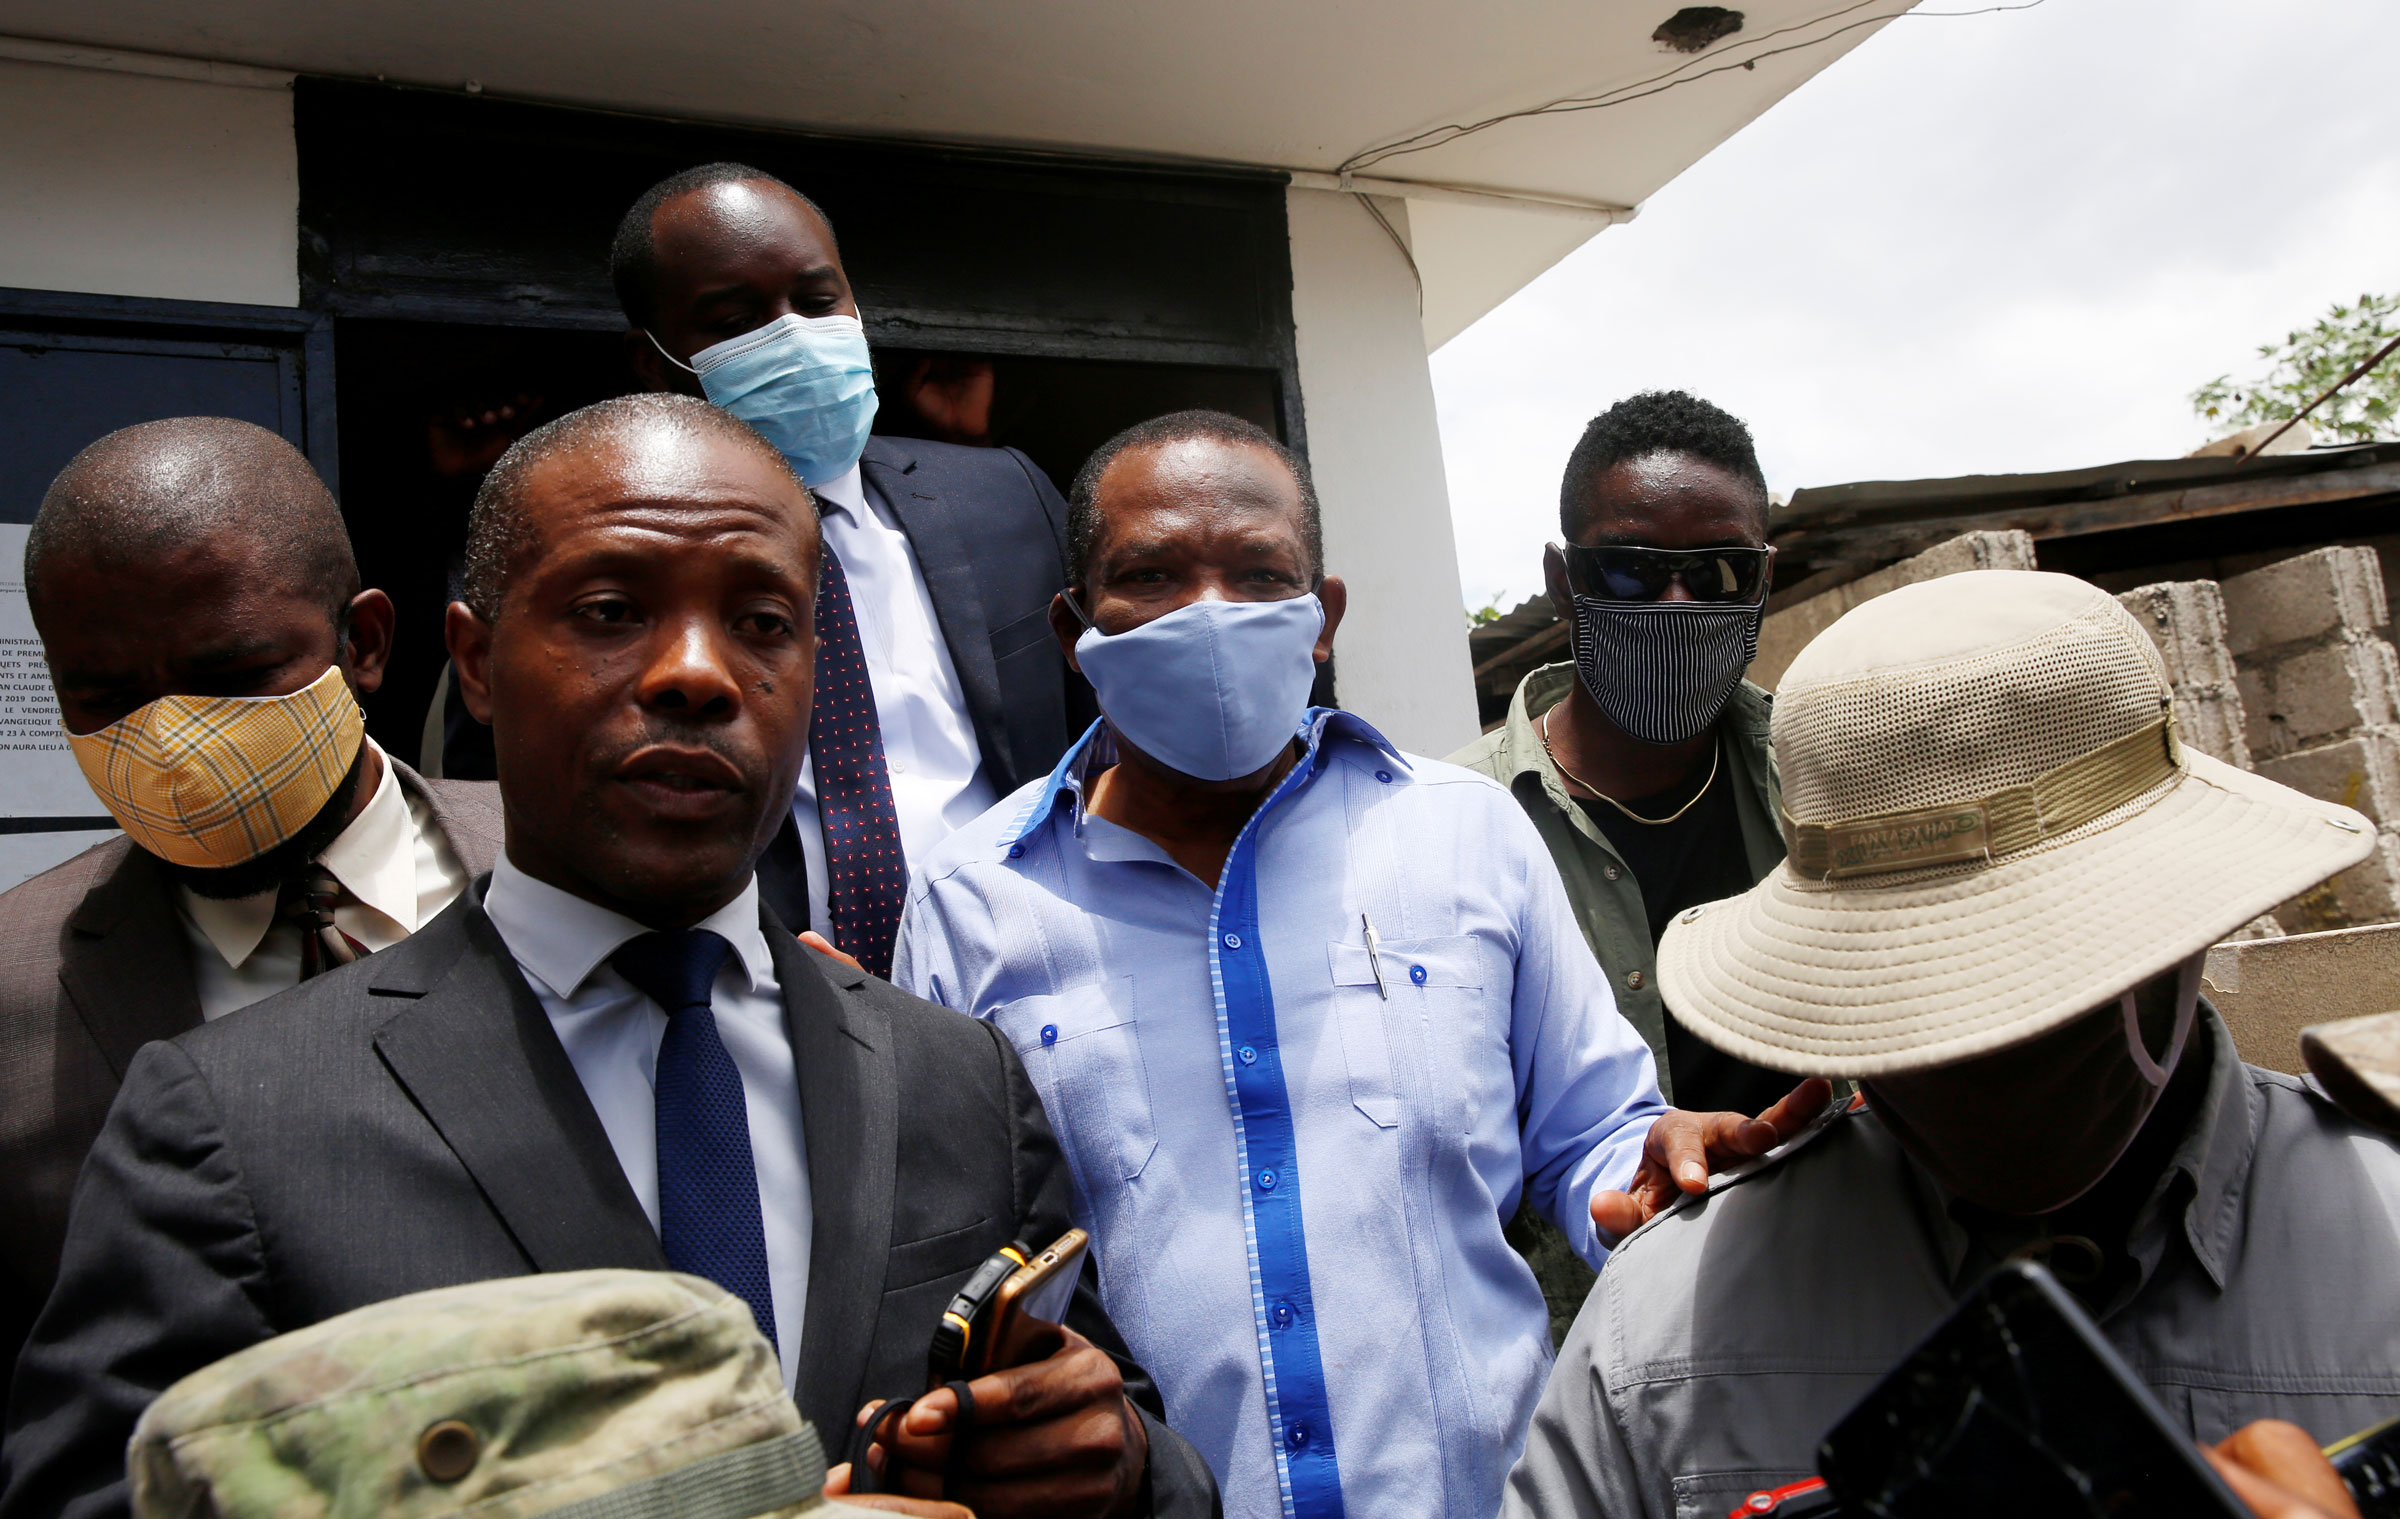 Yves Jean-Bart, president of the Haitian Football Federation, leaves the Crois-Des-Bouquets prosecutor’s office after his hearing, accused of sexually abusing young footballers at the country’s national training centre, in Crois-Des-Bouquets, Haiti, on May 14, 2020. (Jeanty Junior Augustin—Reuters)